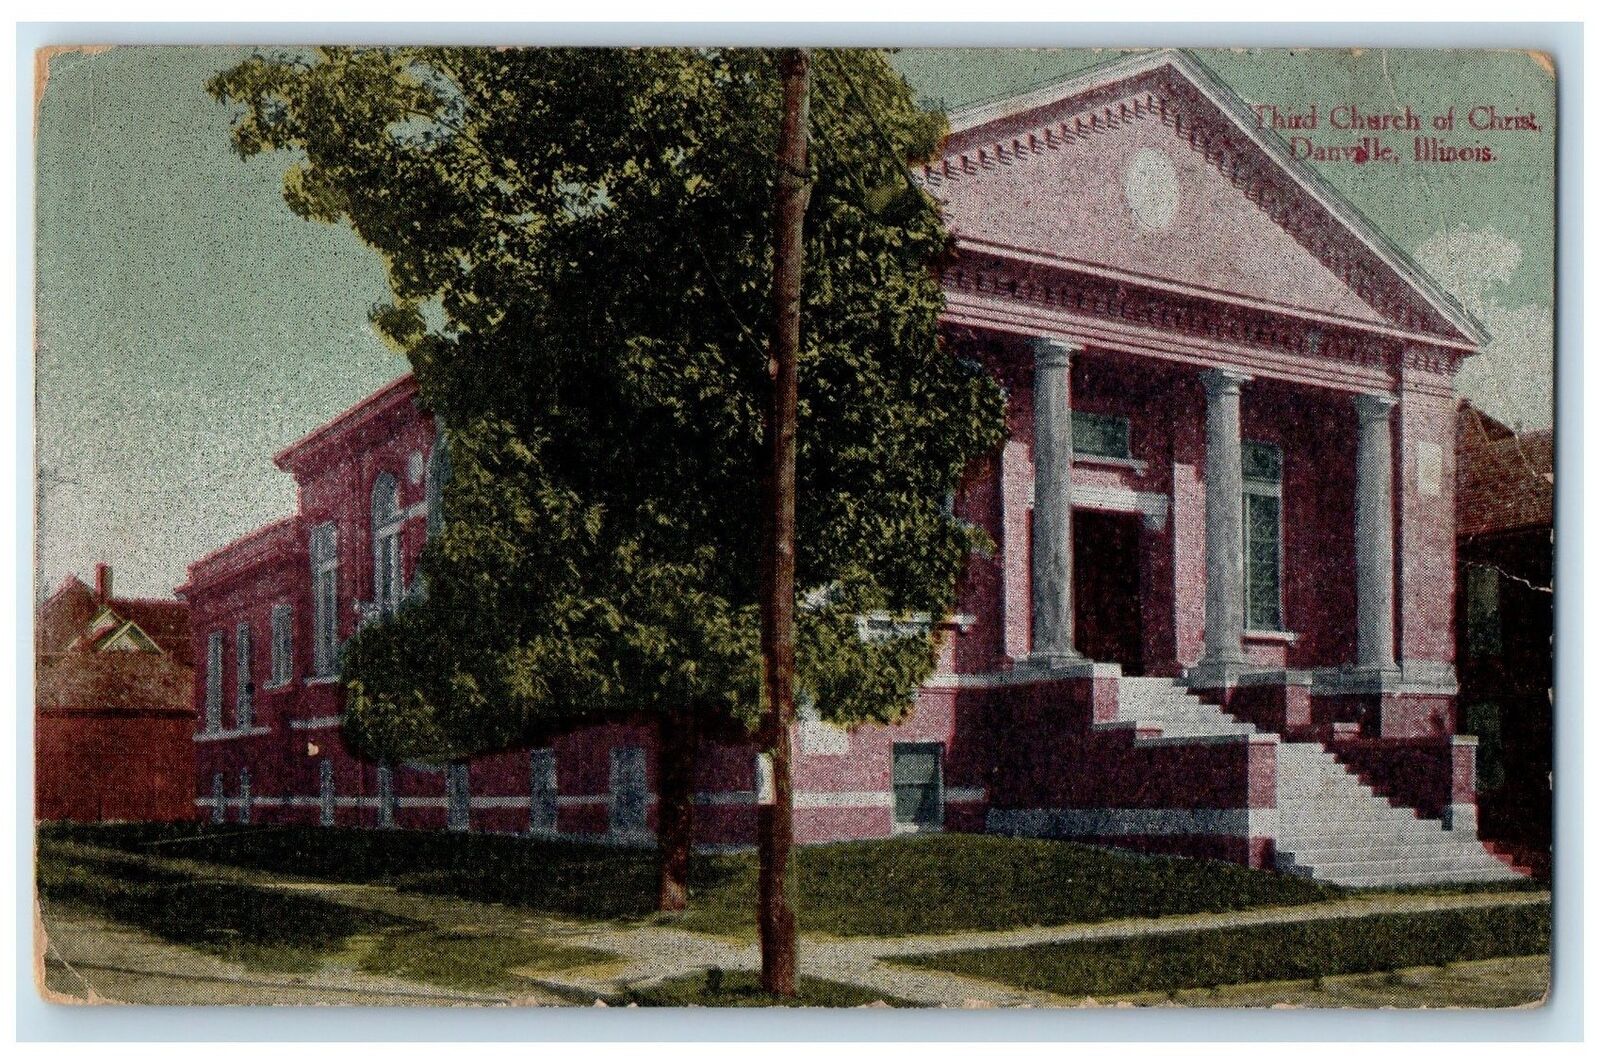 c1912 Third Church Of Christ Building Stairs Entrance Danville Illinois Postcard